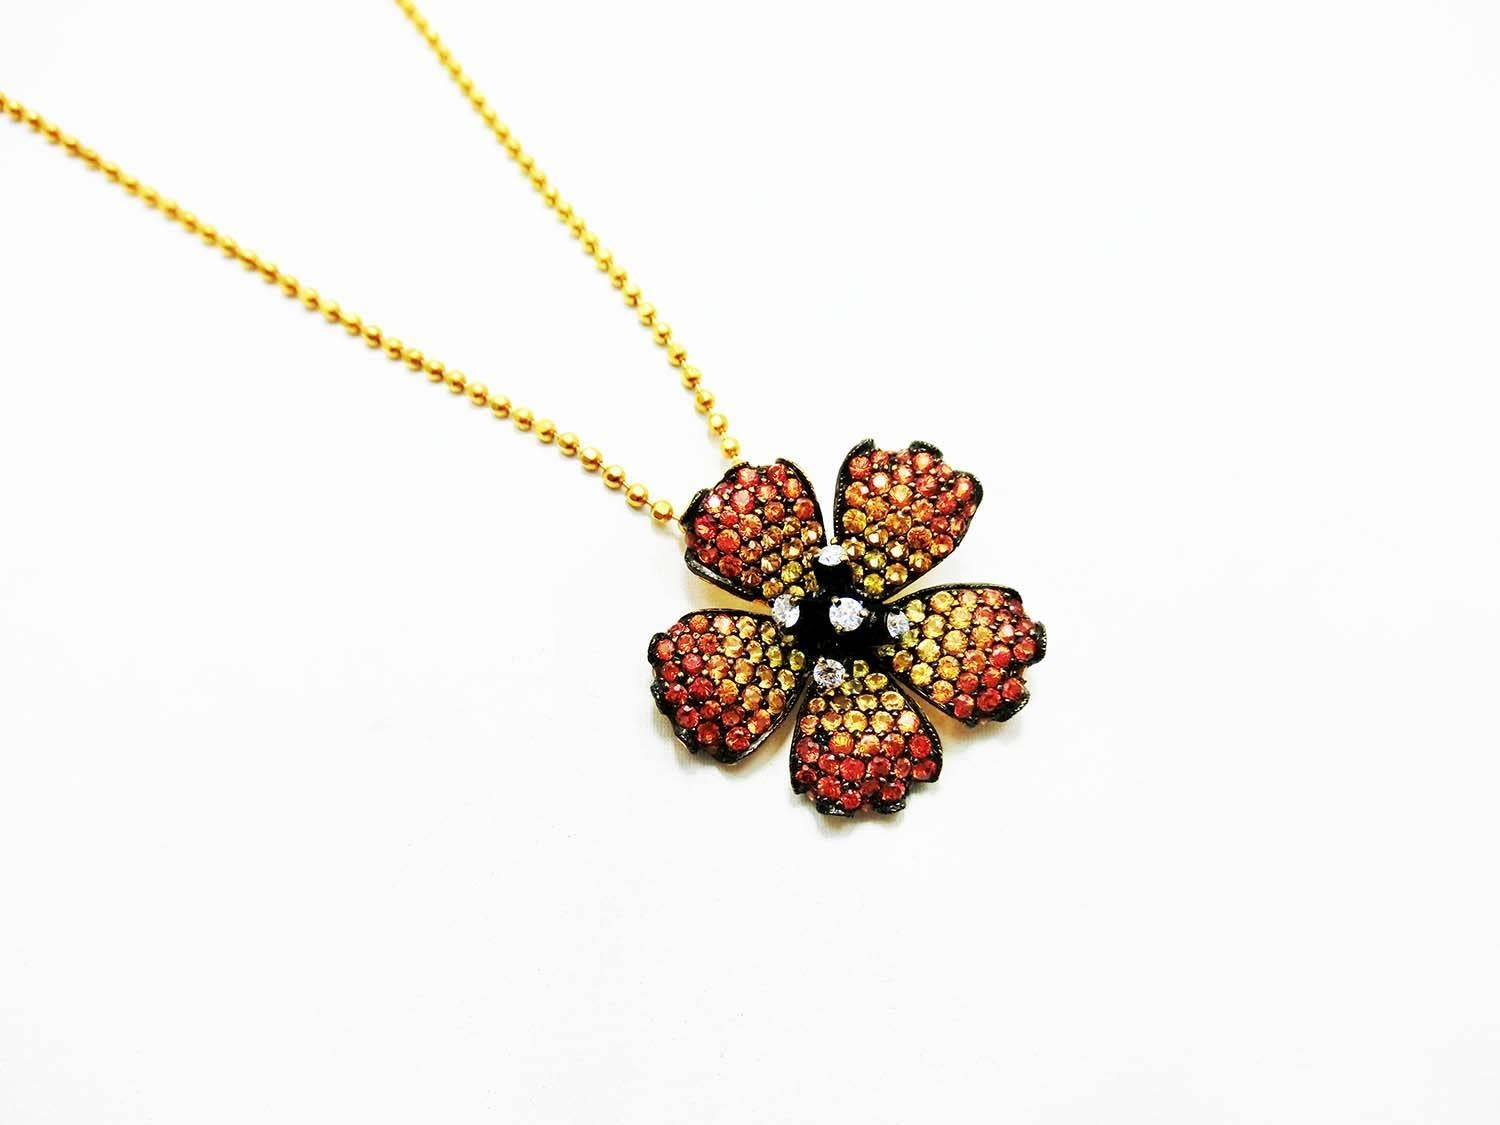 Poppy flower pendant made in 18k Gold .It shade color form light to dark yellow sapphire.Yellow and Orange sapphire is 2.57 ct High quality sapphire,
Diamond 0.14 ct H VS quality This pendant is include the 18k gold chain.